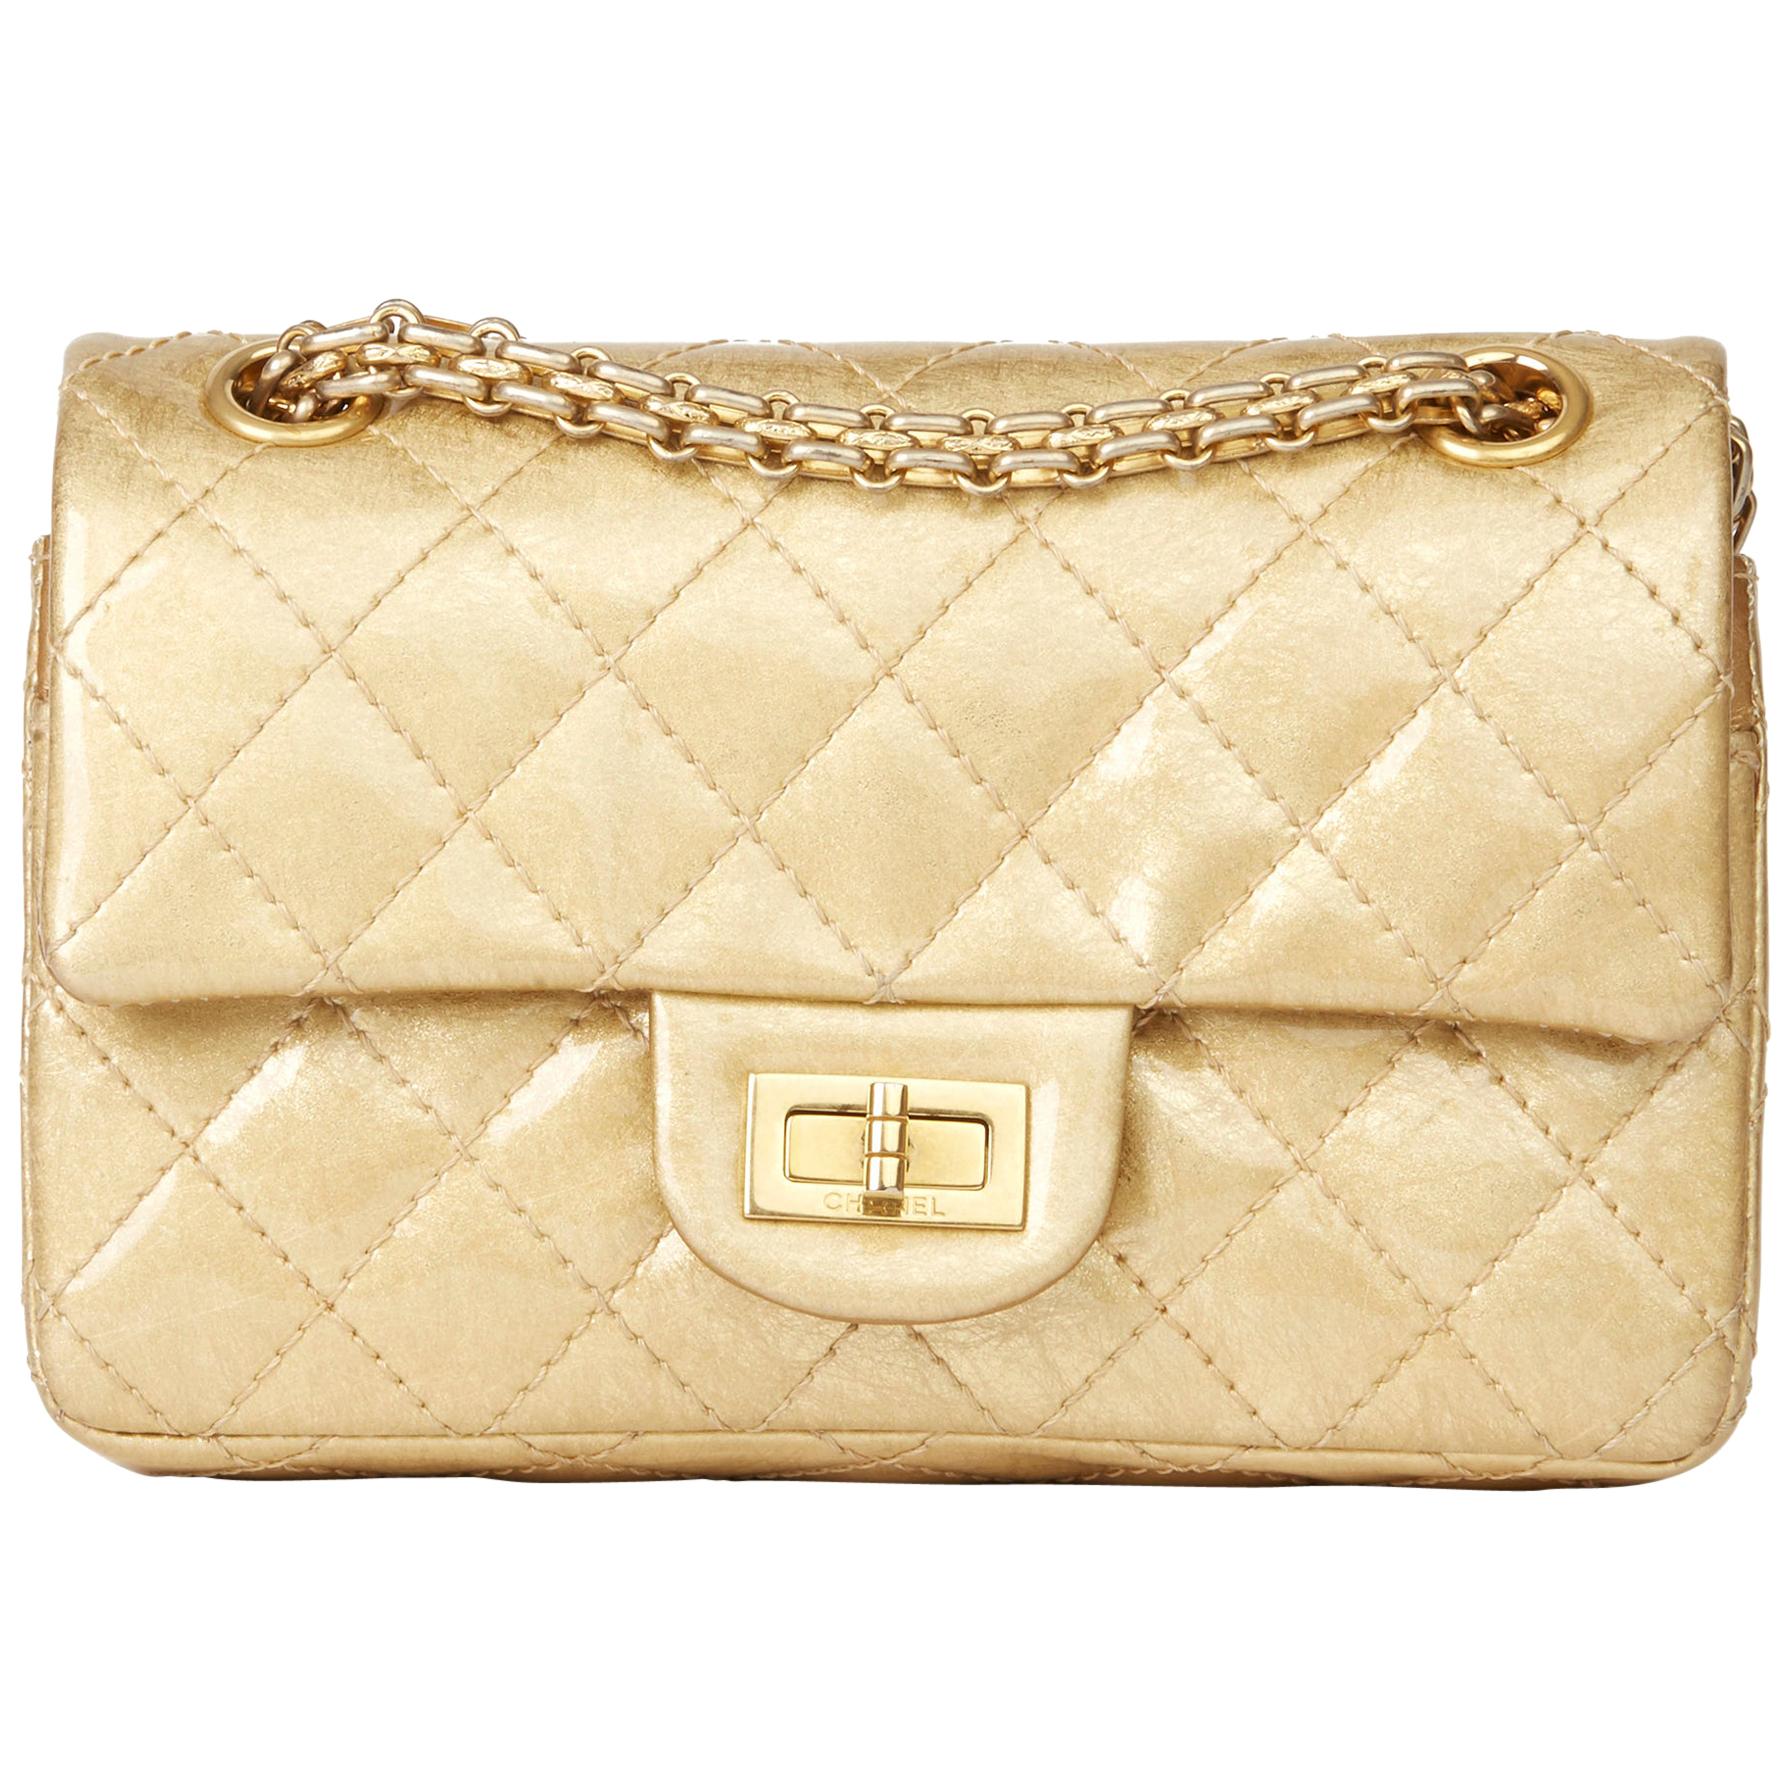 2010 Chanel Gold Quilted Metallic Aged Patent Leather Reissue Double Flap Bag